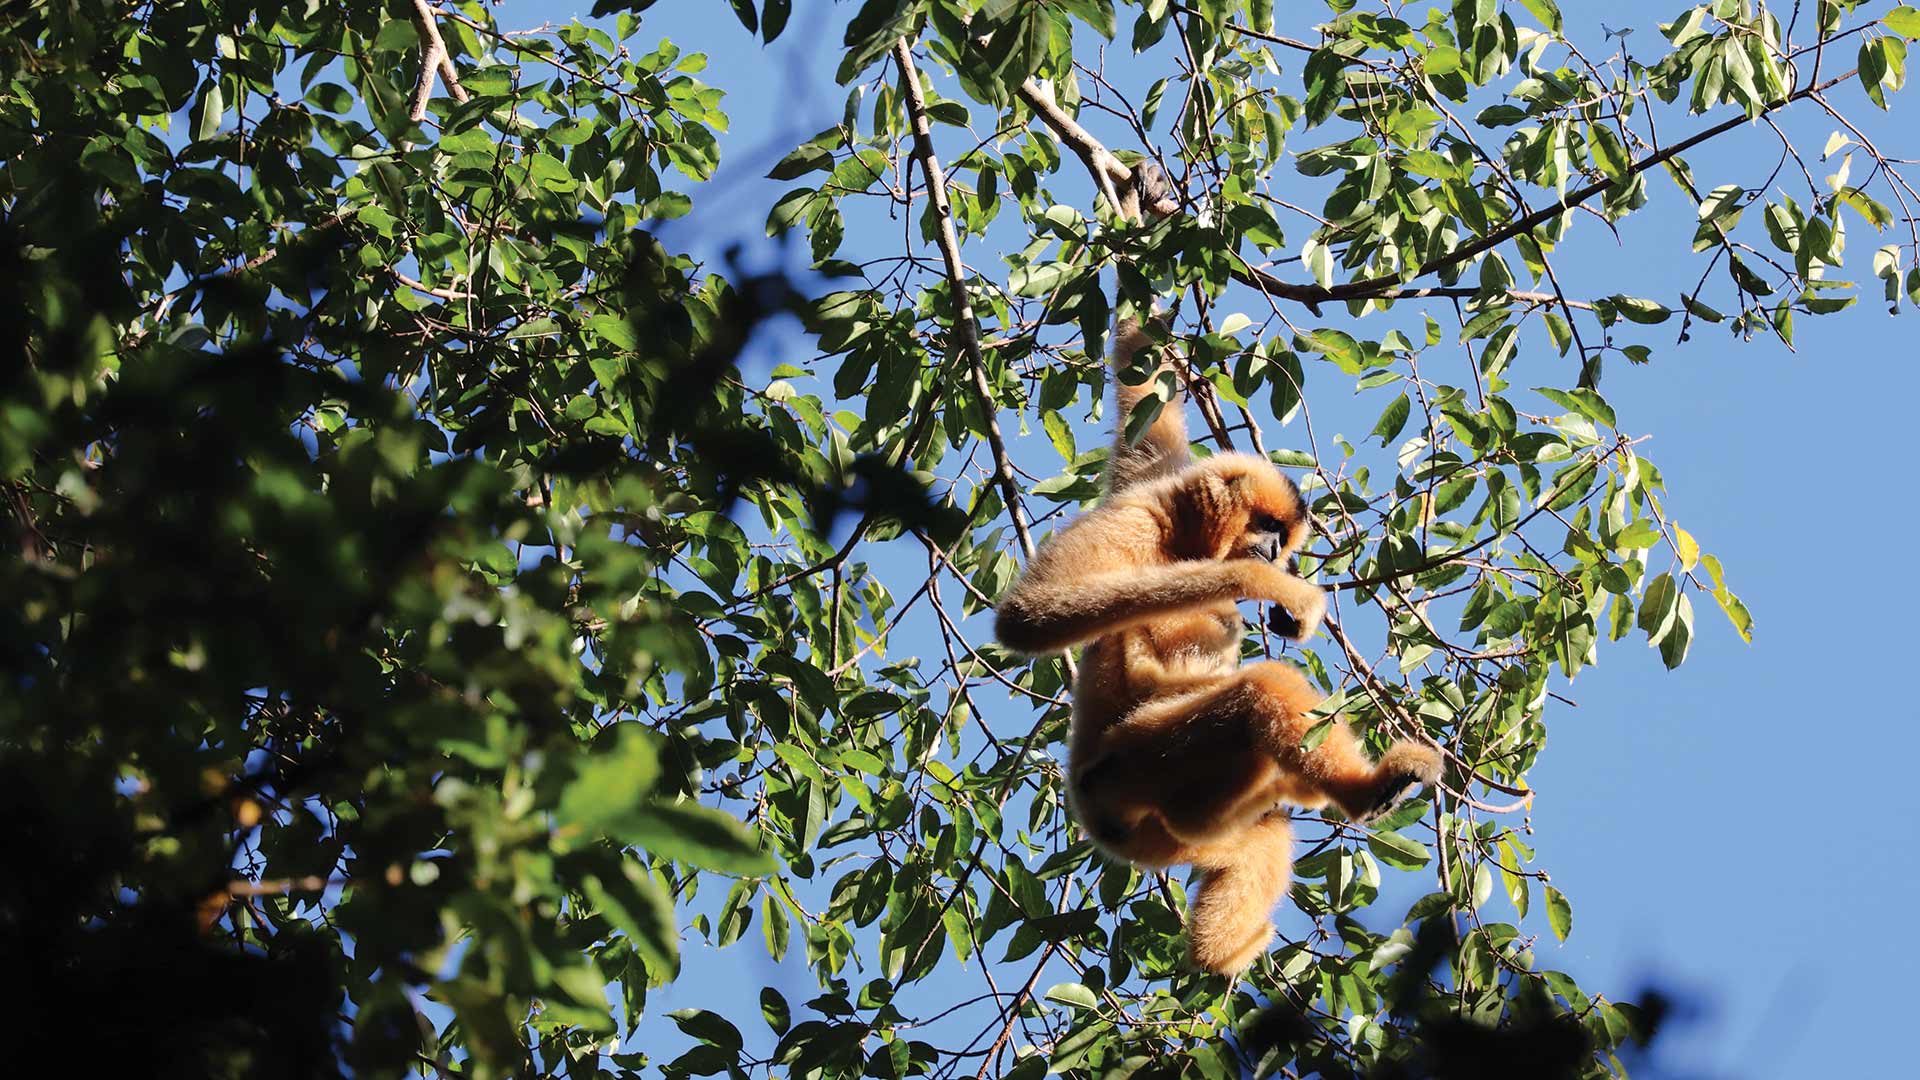 Gibbon swinging in tree in Cambodia during Houghton research trip.